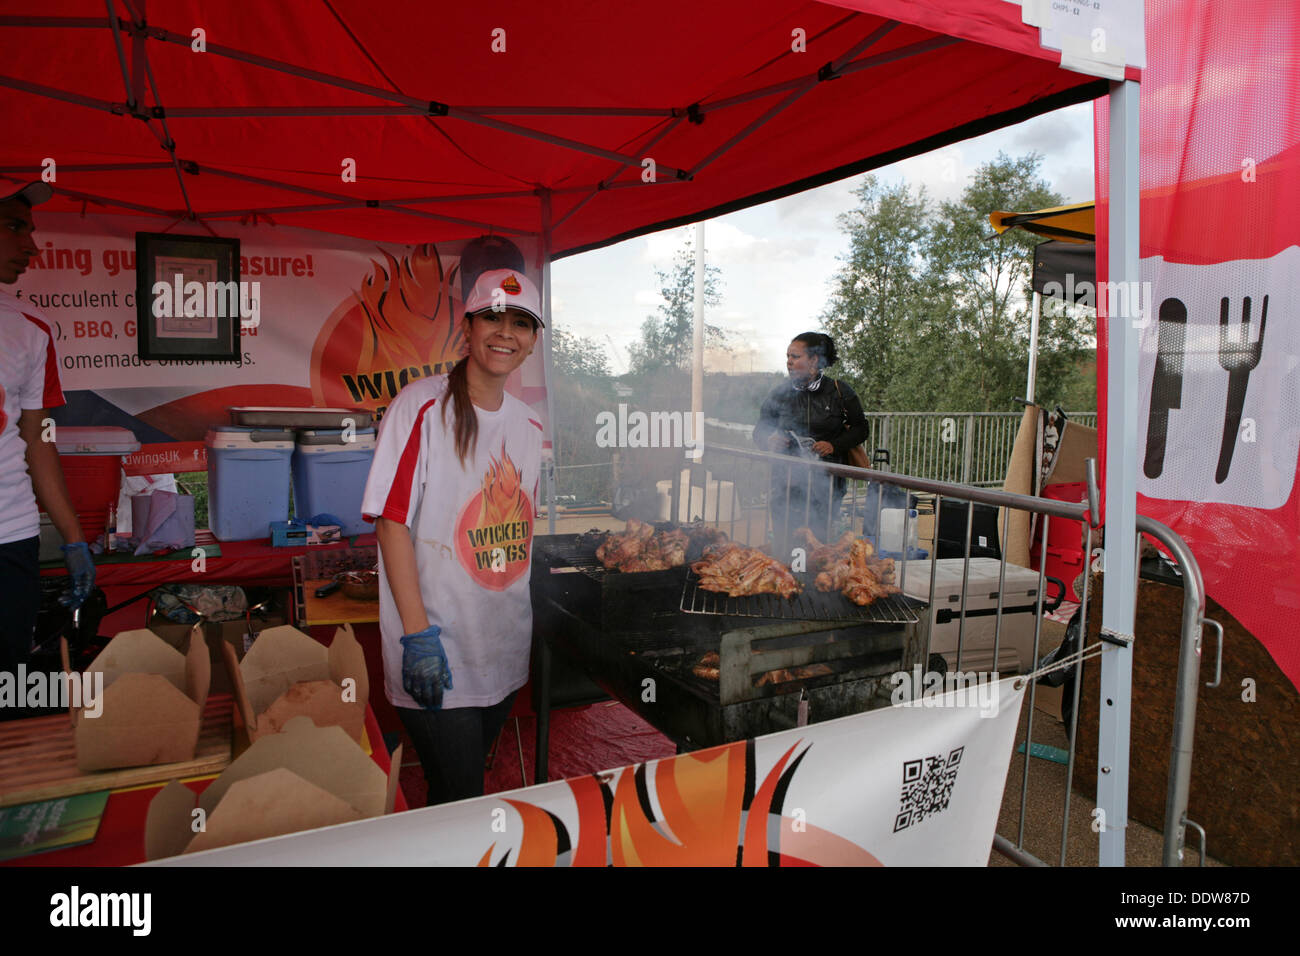 Stratford, UK. 7th September 2013. Wicked wings food stall at the National Paralympic Day Credit: Keith larby/Alamy Live News Stock Photo